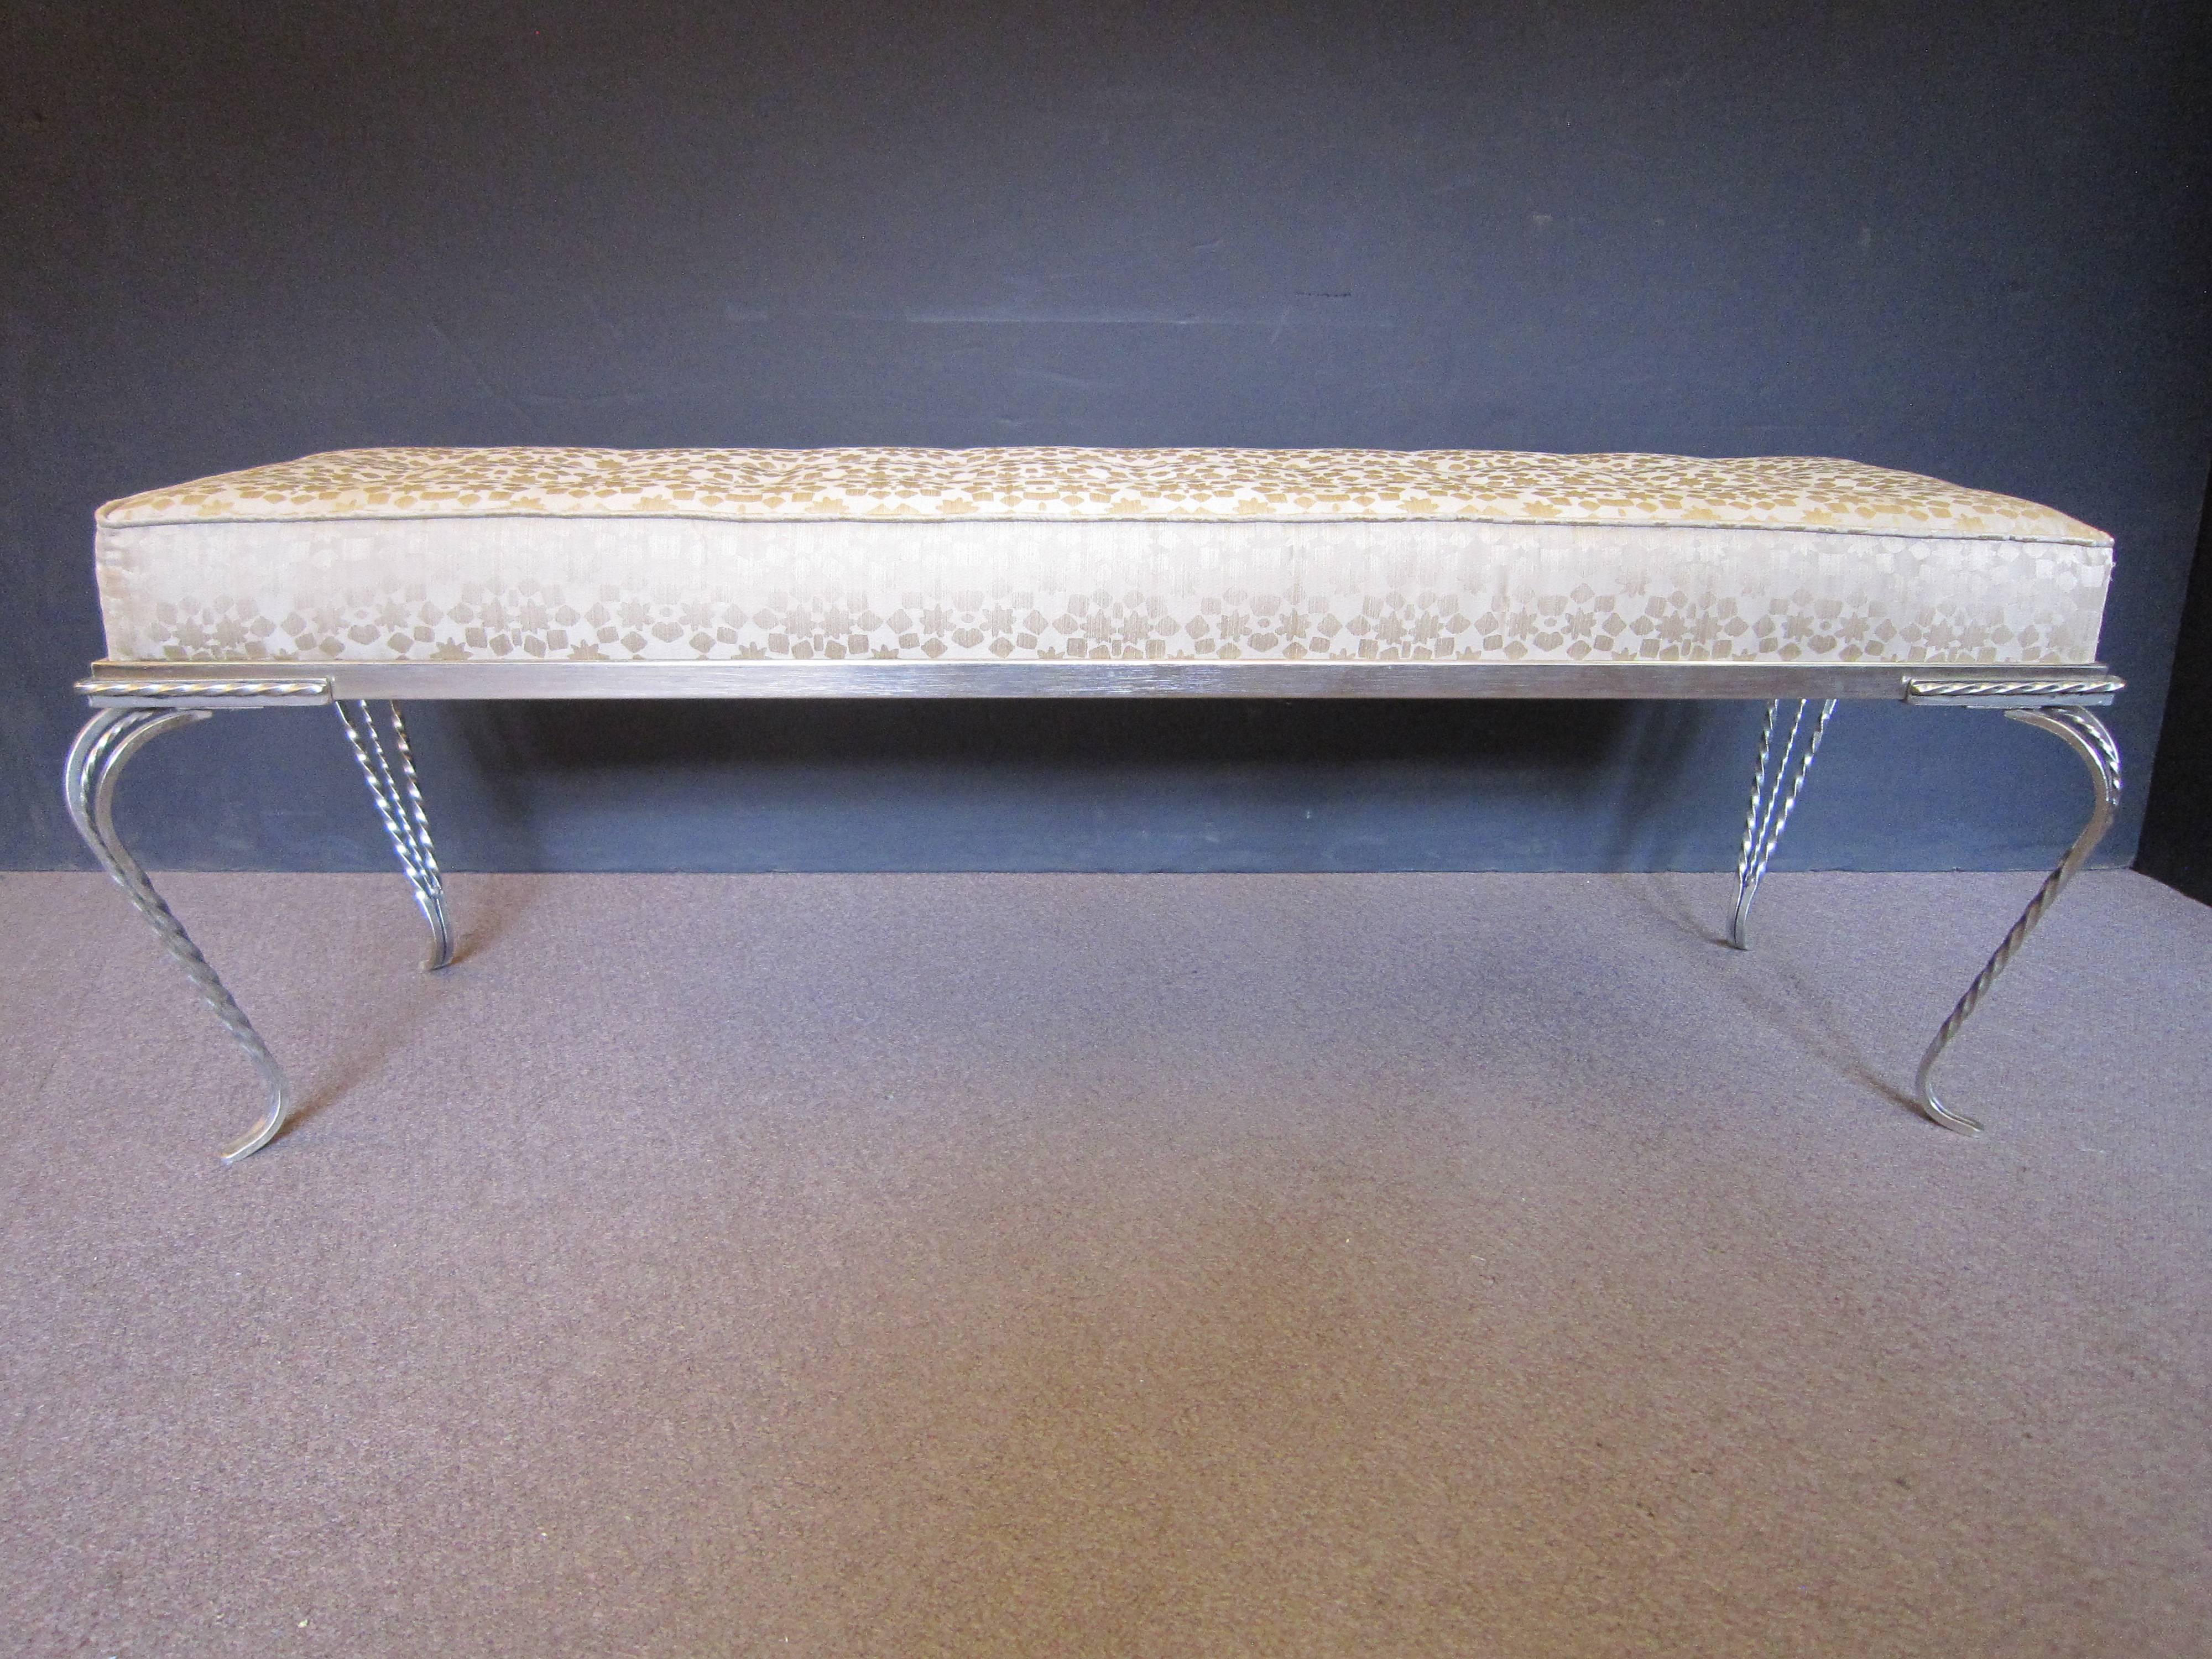 French Modernist hand hammered iron bench with four scroll legs displaying rope twist and flat stock design on the fer forge
 The tufted seat in champagne colored silky fabric features small gold hued geometric patterns overall. 
Can be used at the